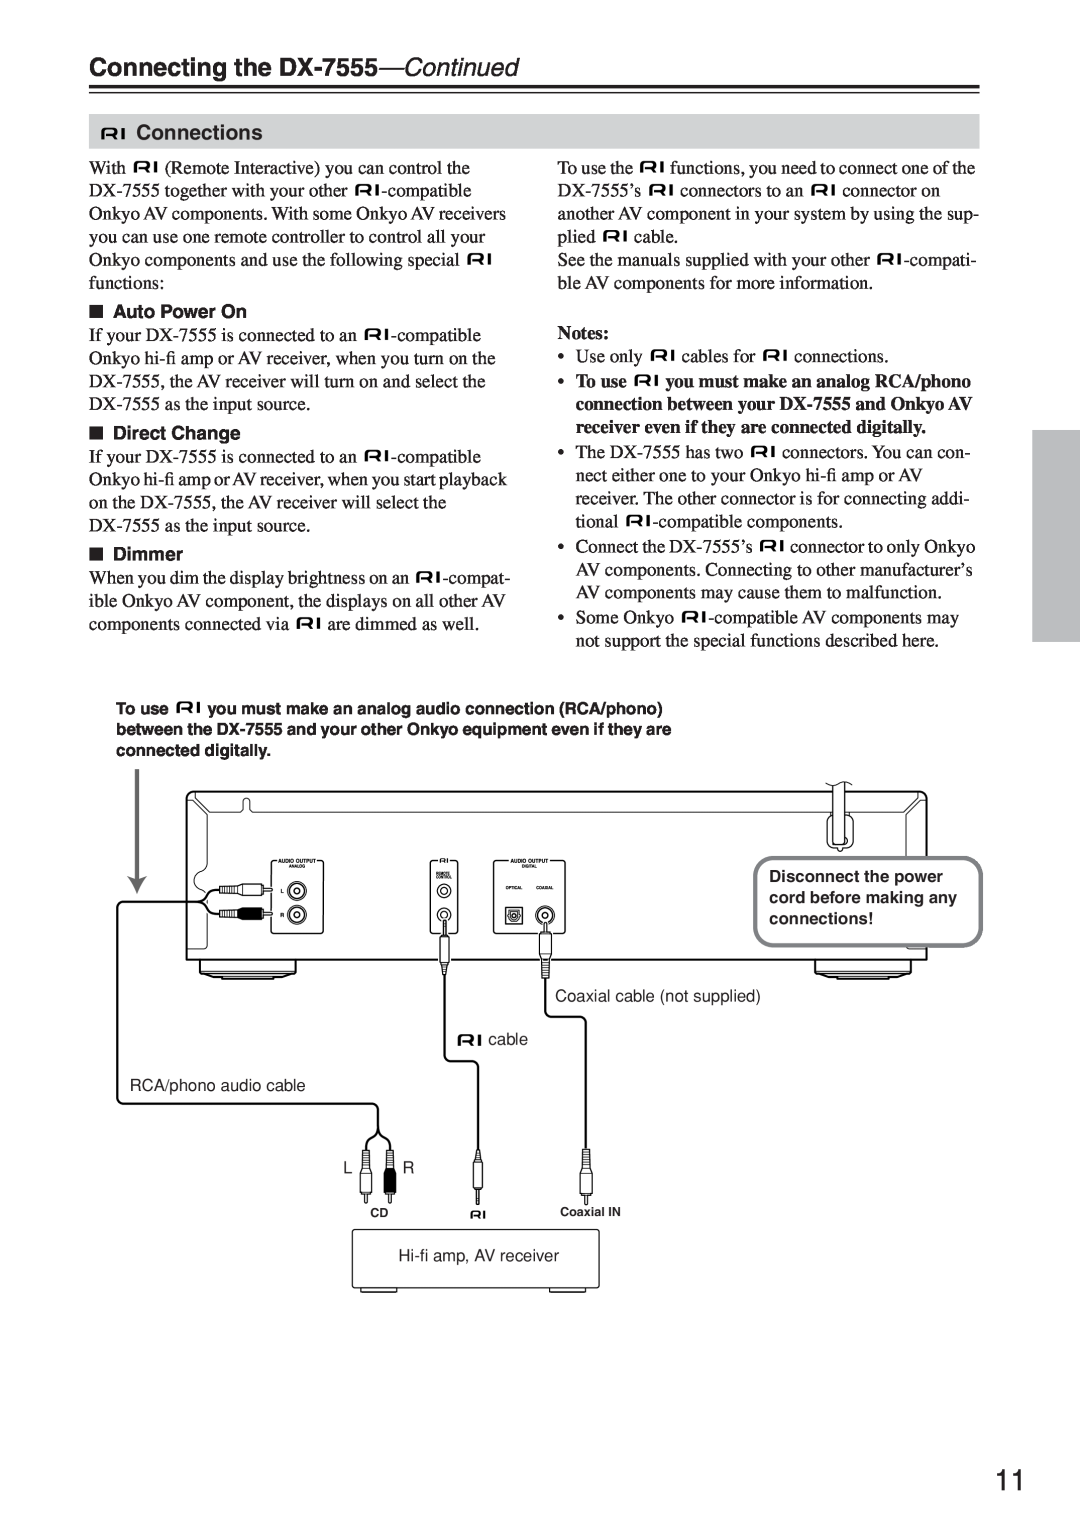 Onkyo instruction manual Connecting the DX-7555-Continued, Connections 